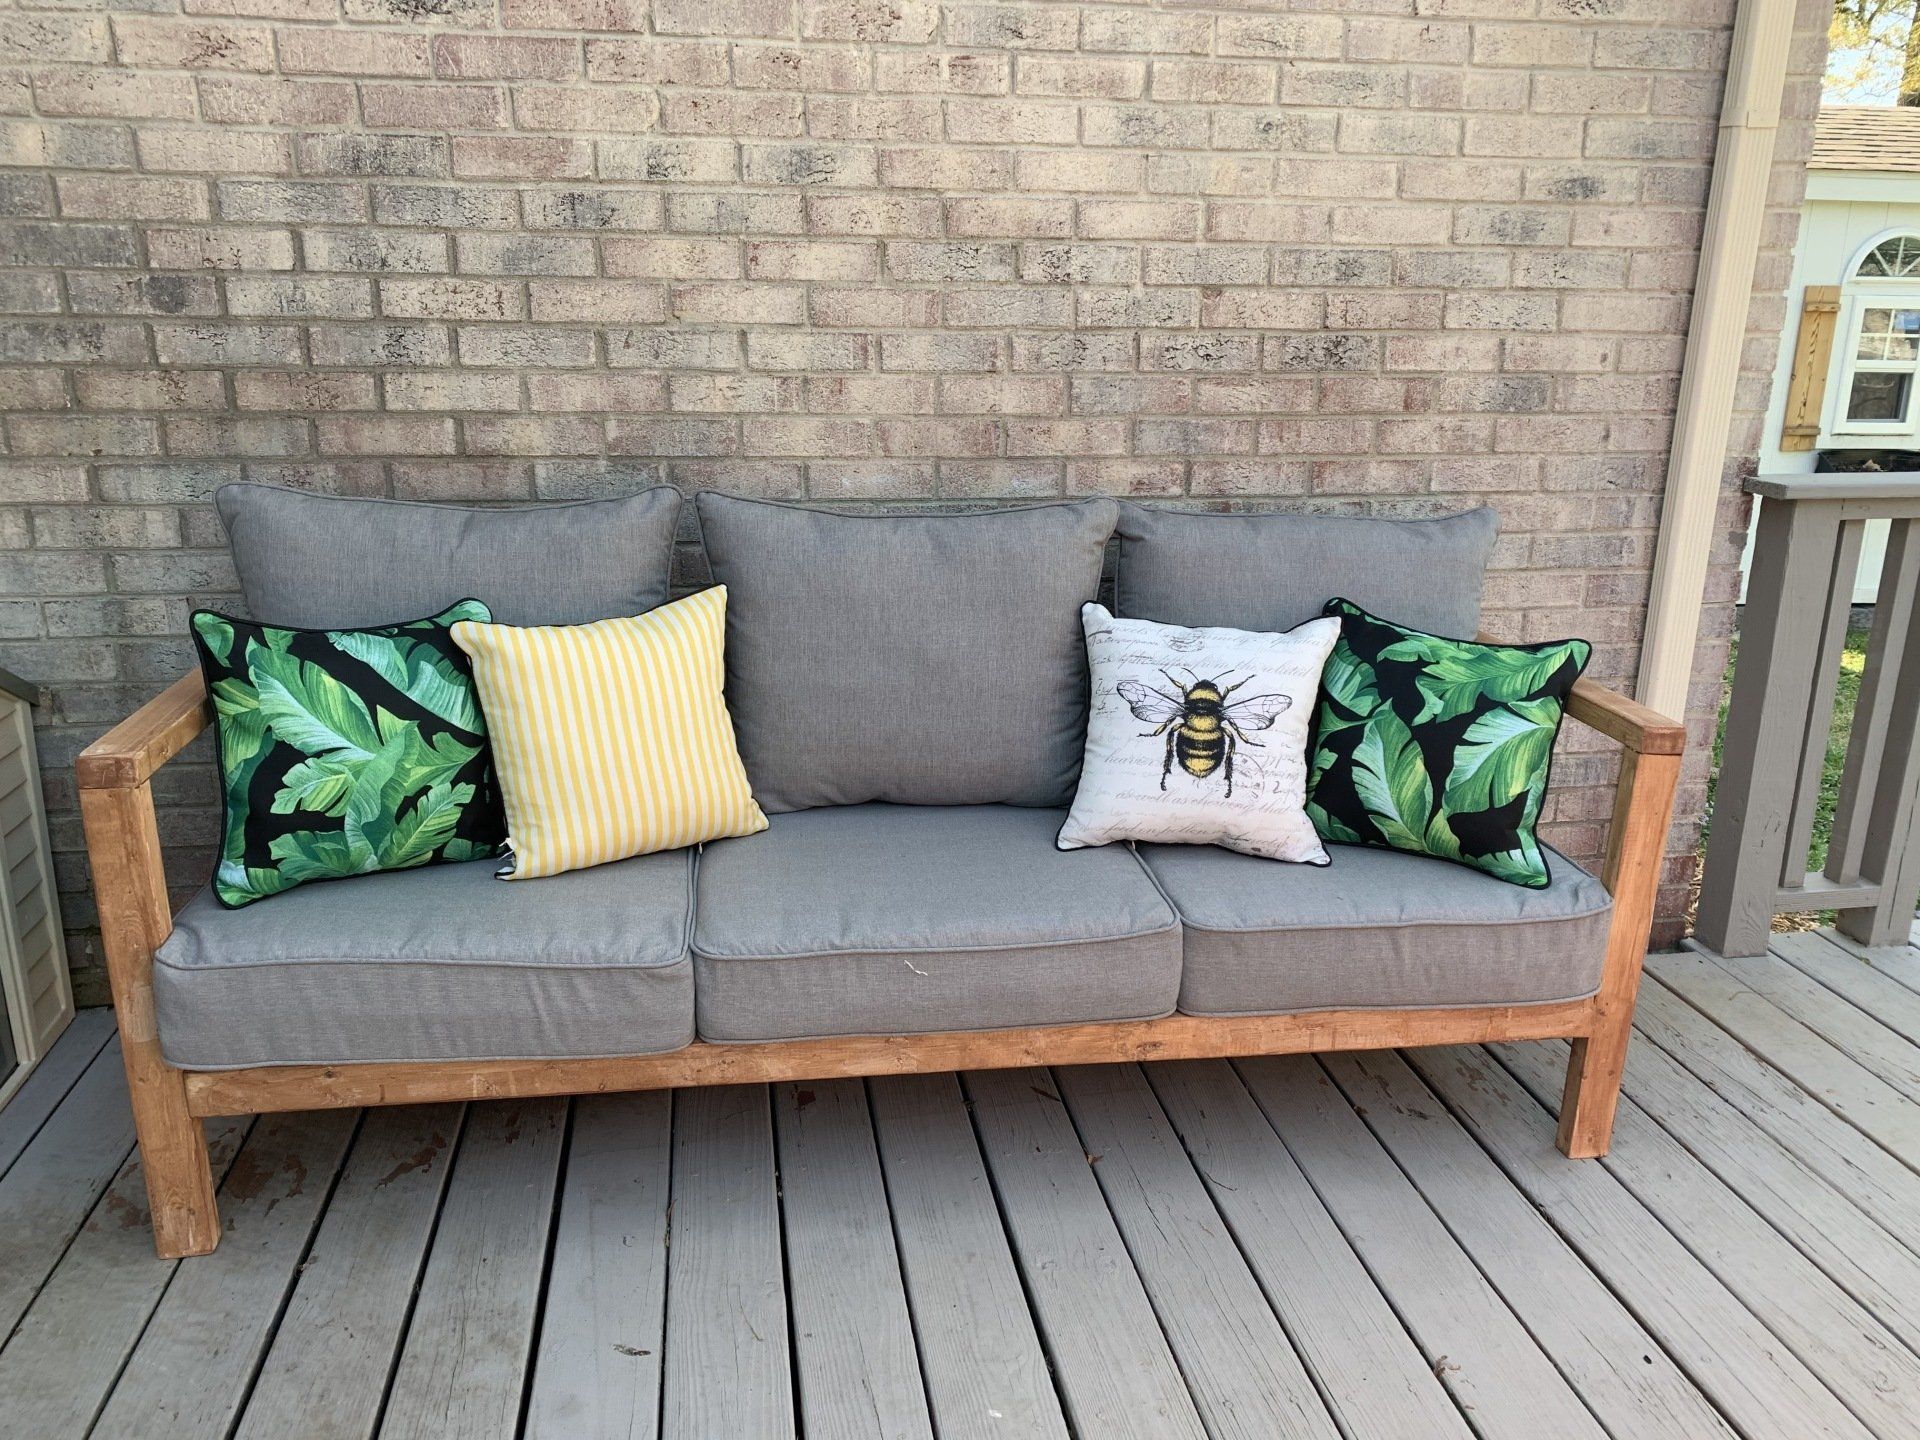 DIY Outdoor Sofa: Building Your Own Relaxation Oasis插图4